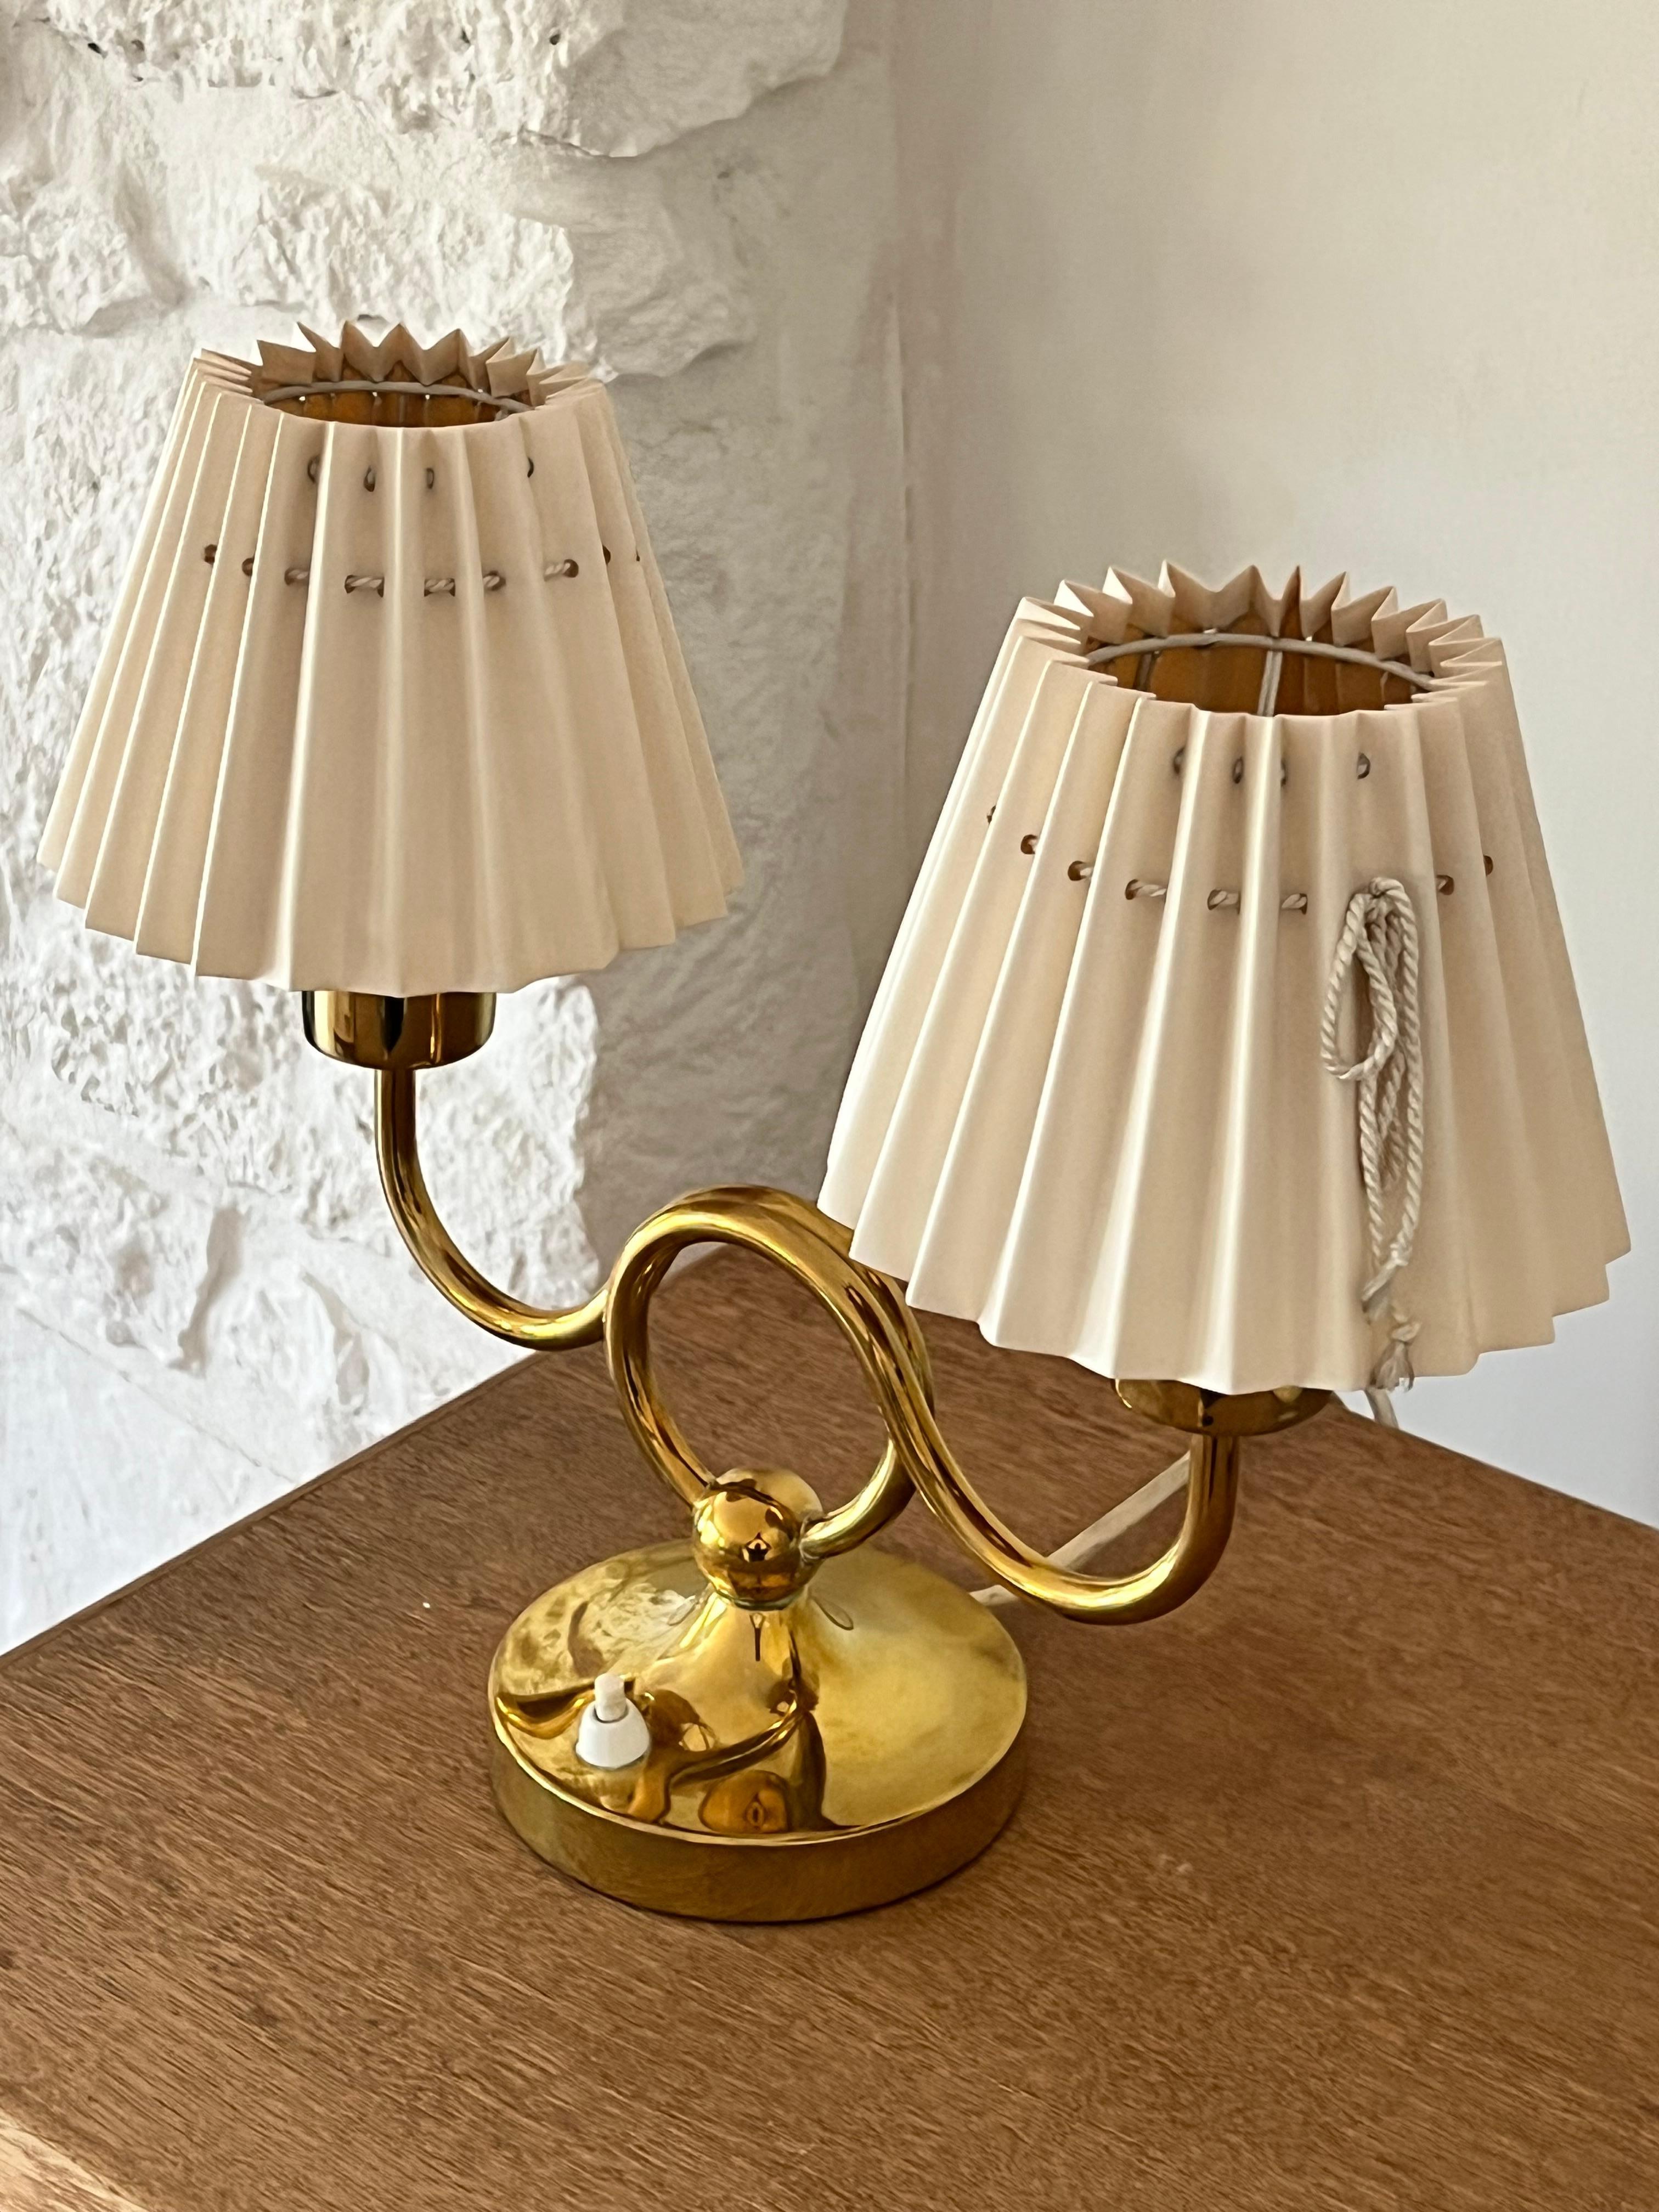 Hand-Crafted Josef Frank Brass & Pleated Shades Table Lamp - 1960s Svenskt Tenn, Sweden For Sale